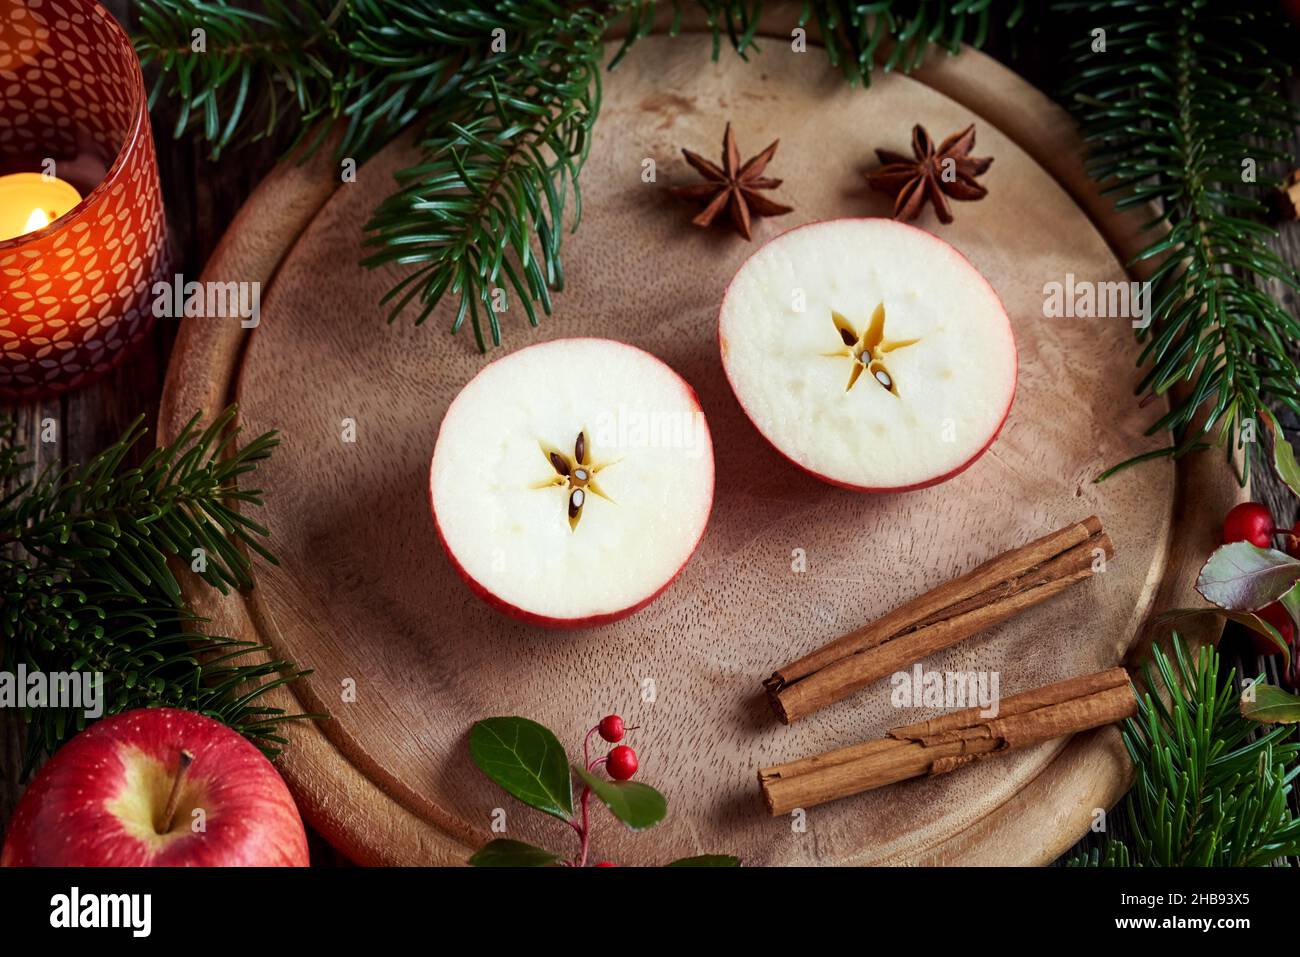 Christmas decoration with an apple cut in two halves with a star in the middle Stock Photo